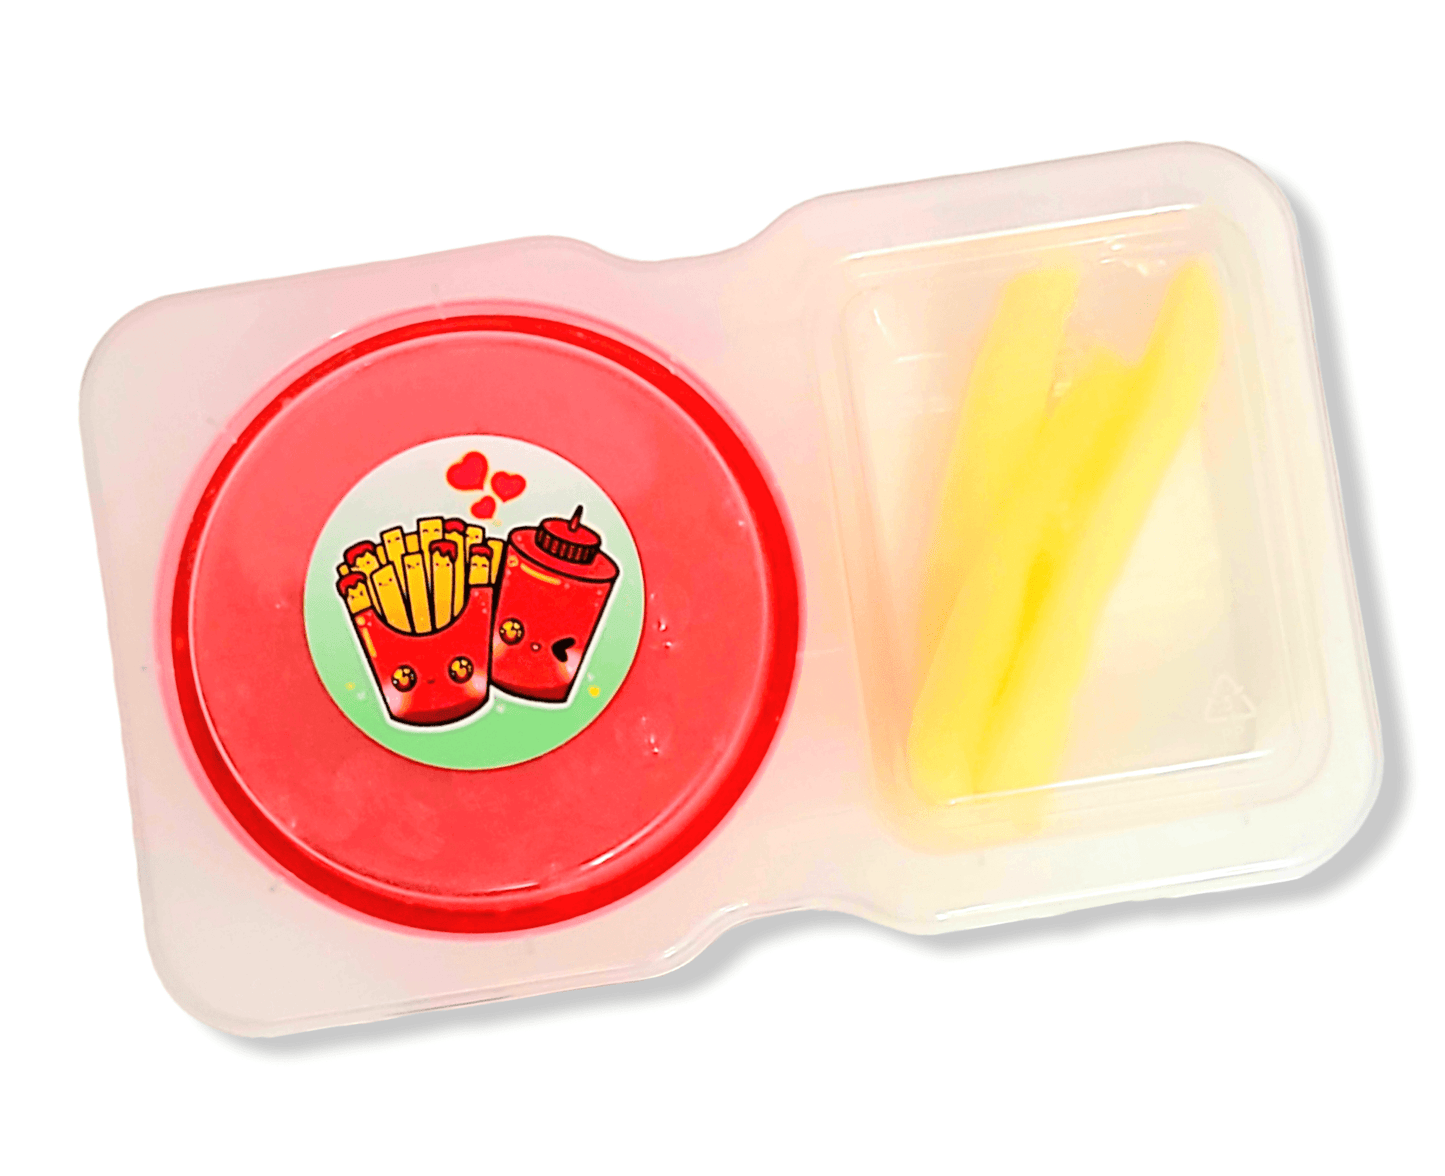 Fries & Ketchup Handmade Clear Scented Slime Slime by Hoshimi Slimes LLC | Hoshimi Slimes LLC